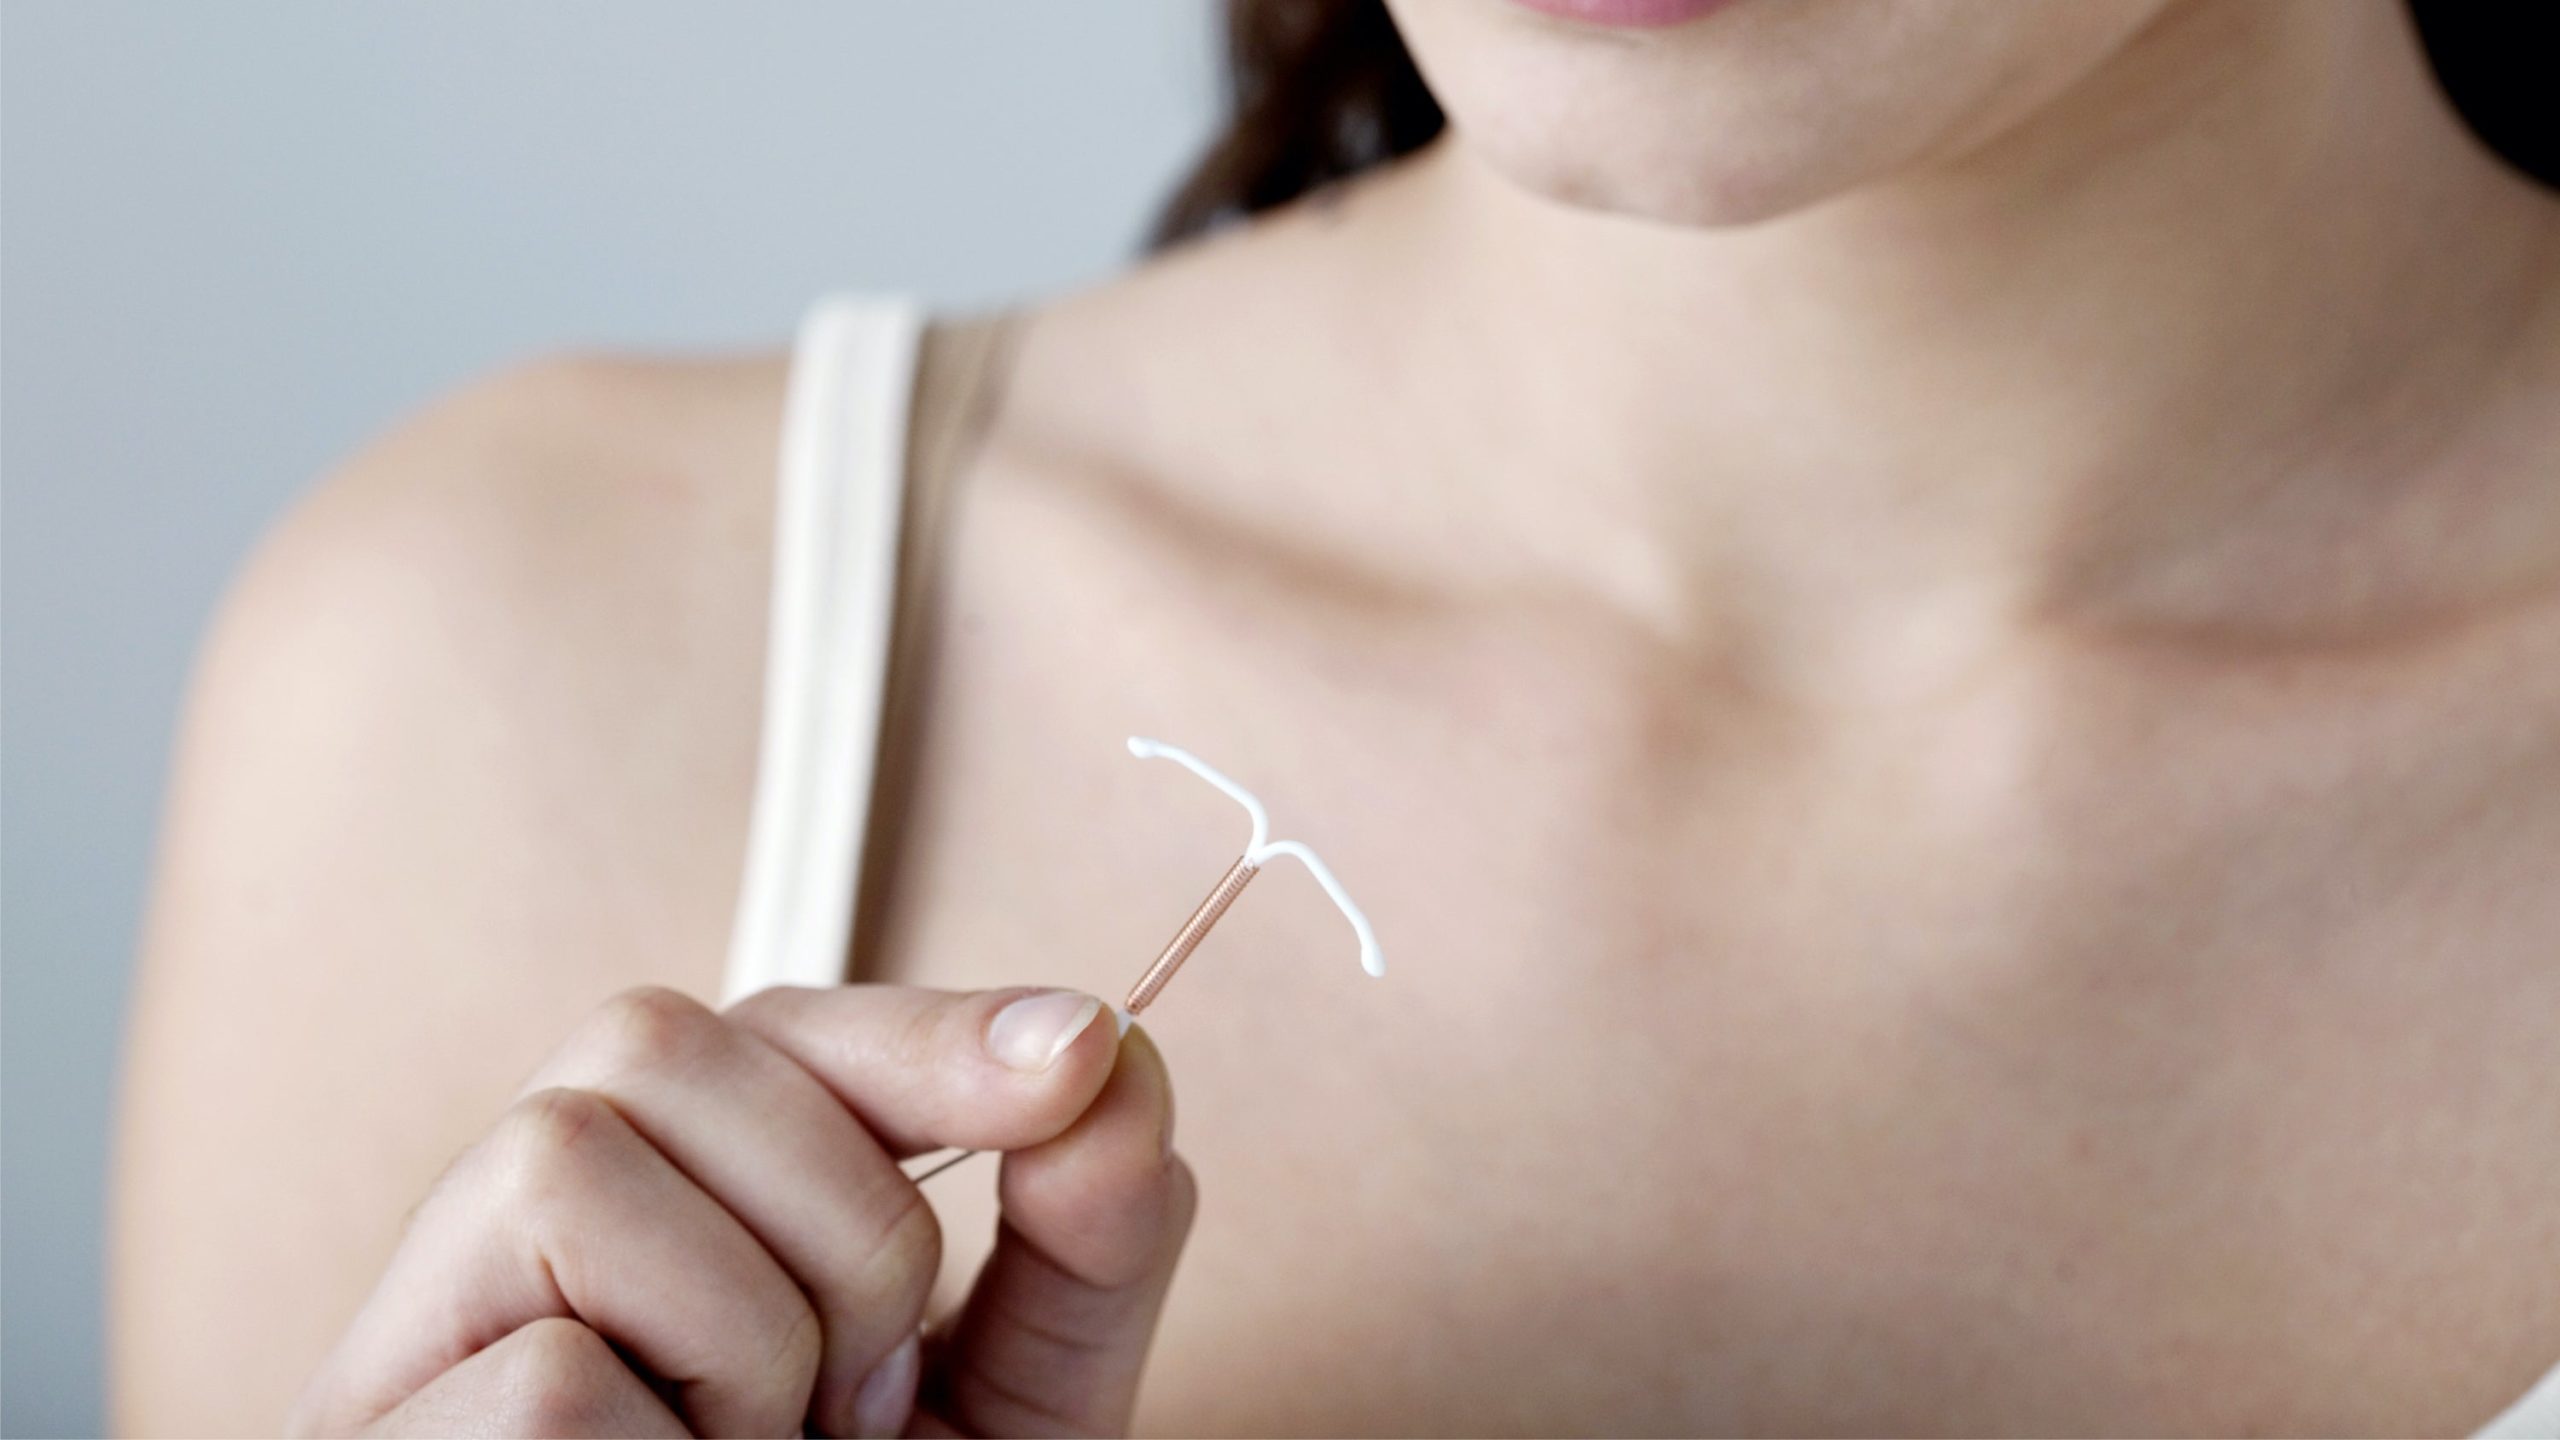 Yes, You Can Remove Your Own IUD, But You Probably Shouldn’t